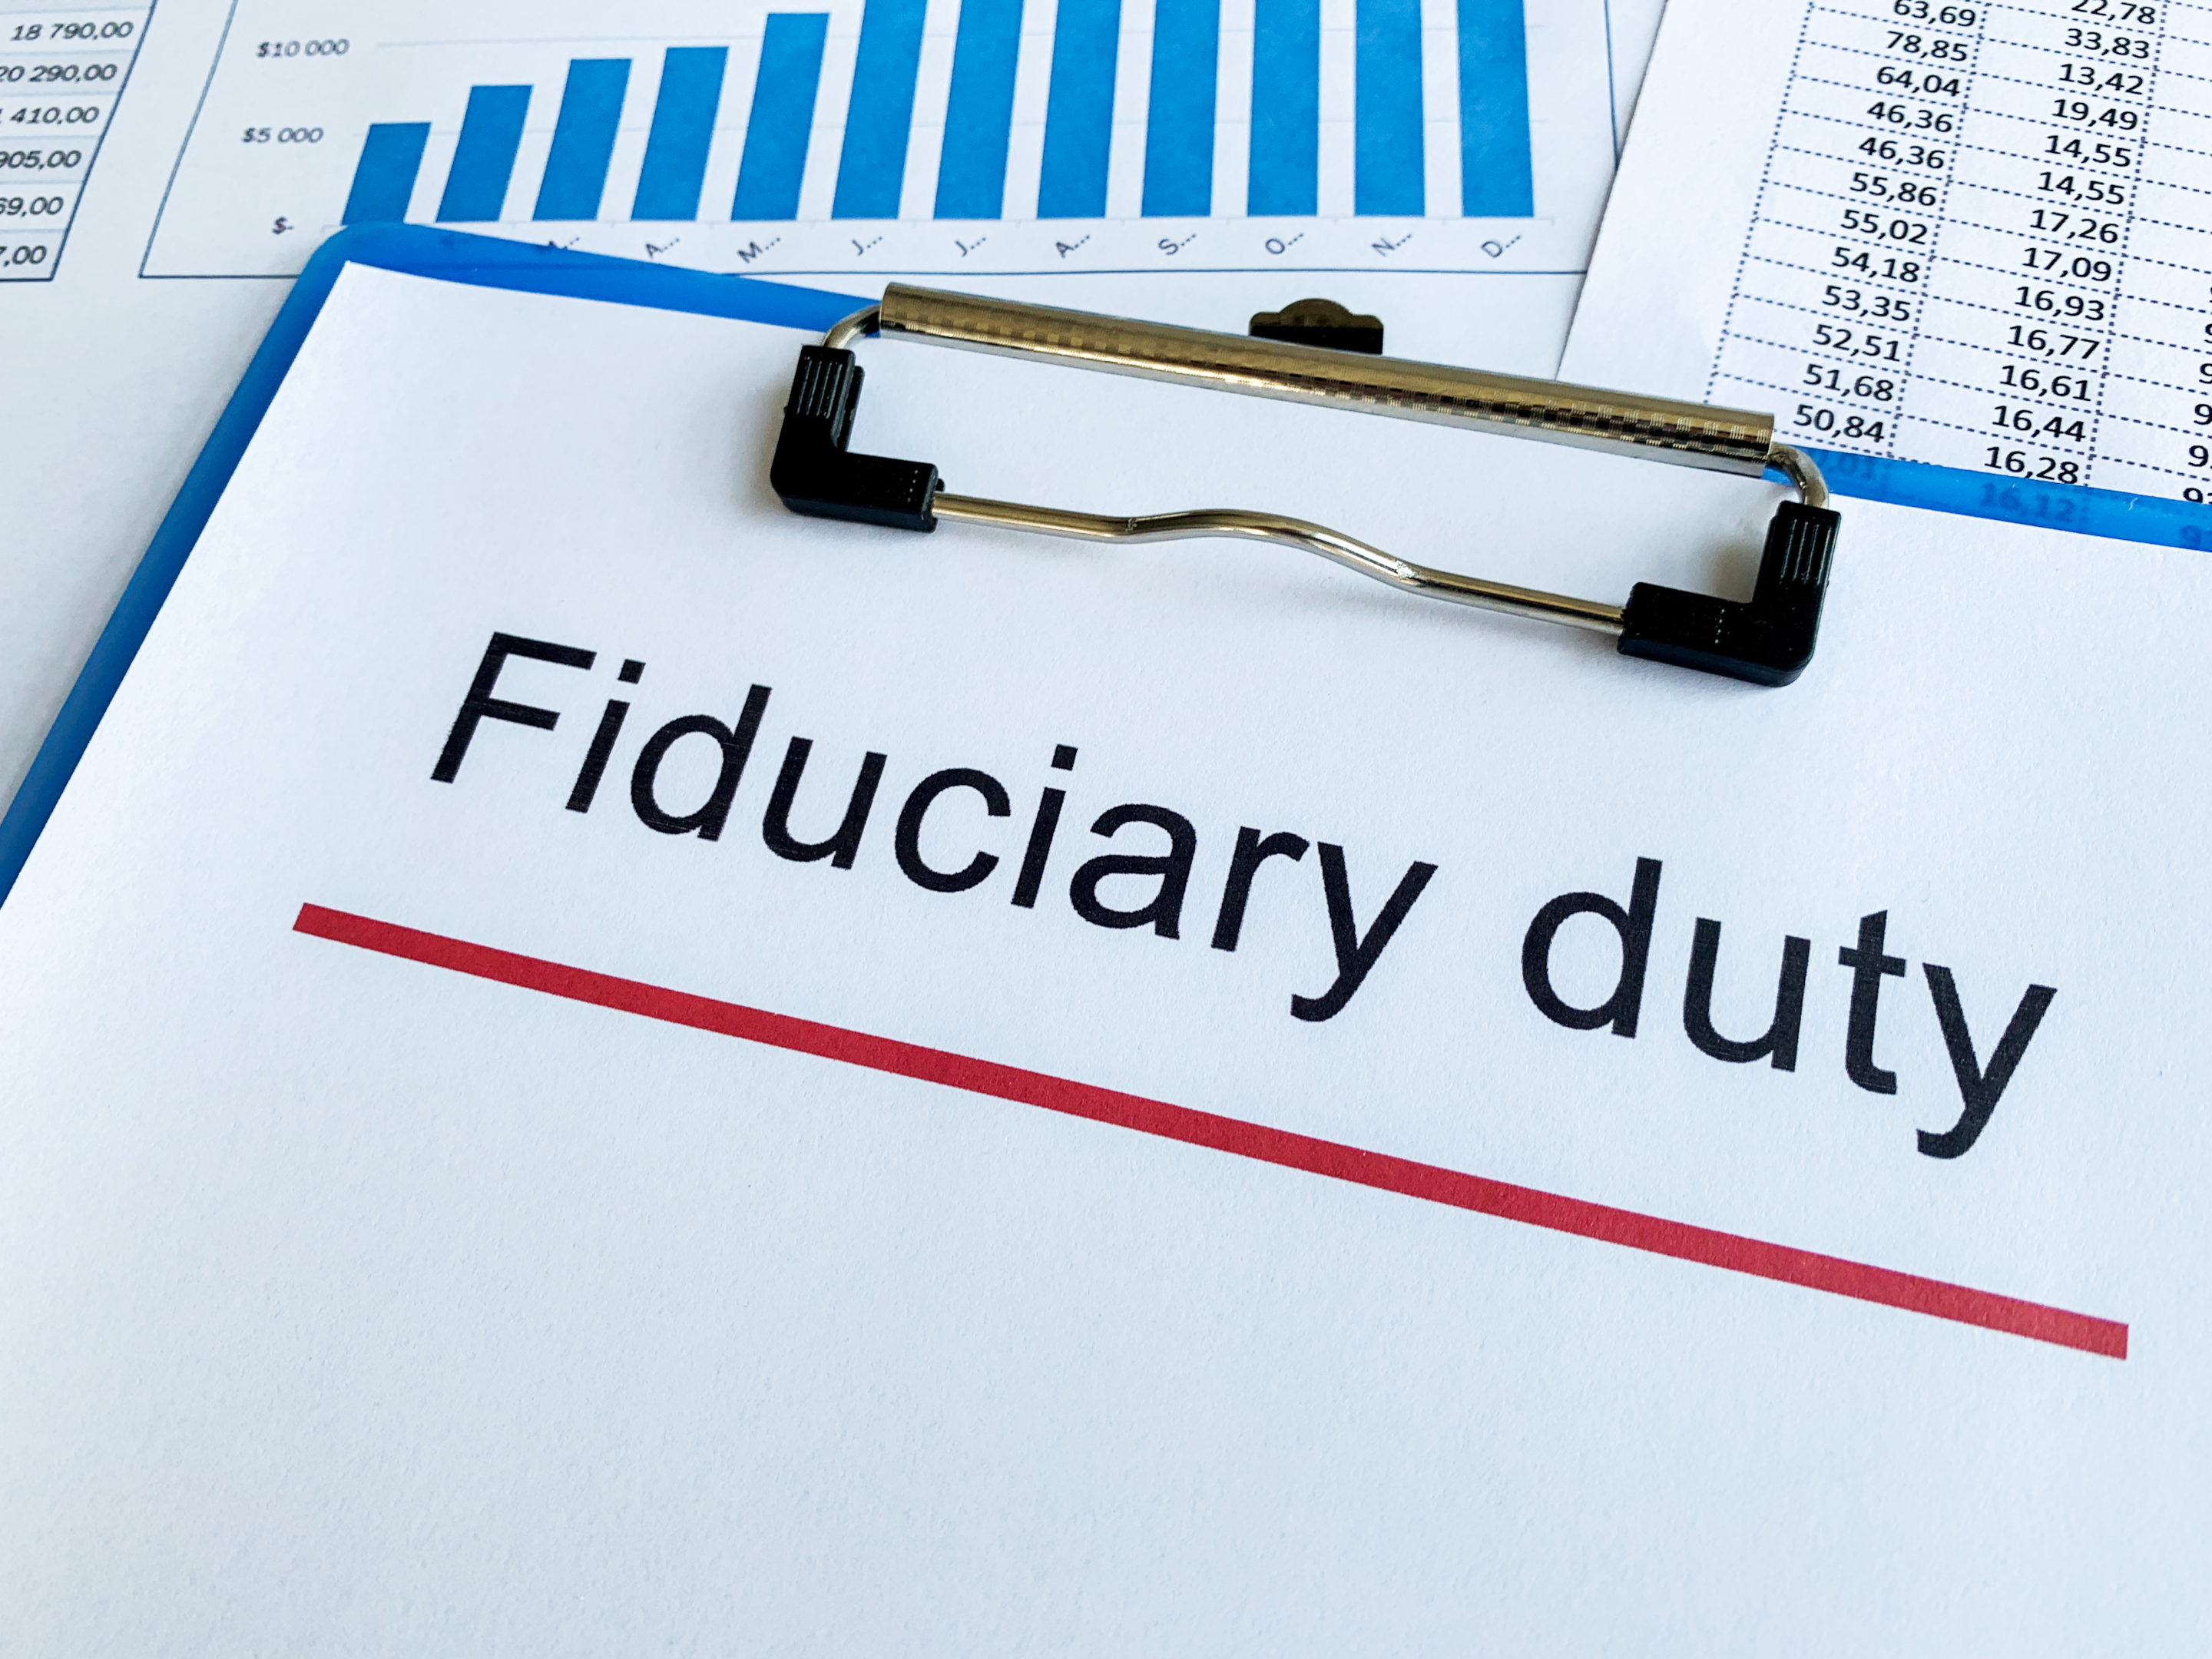  "On the table of trust: deciphering when fiduciary duty calls."